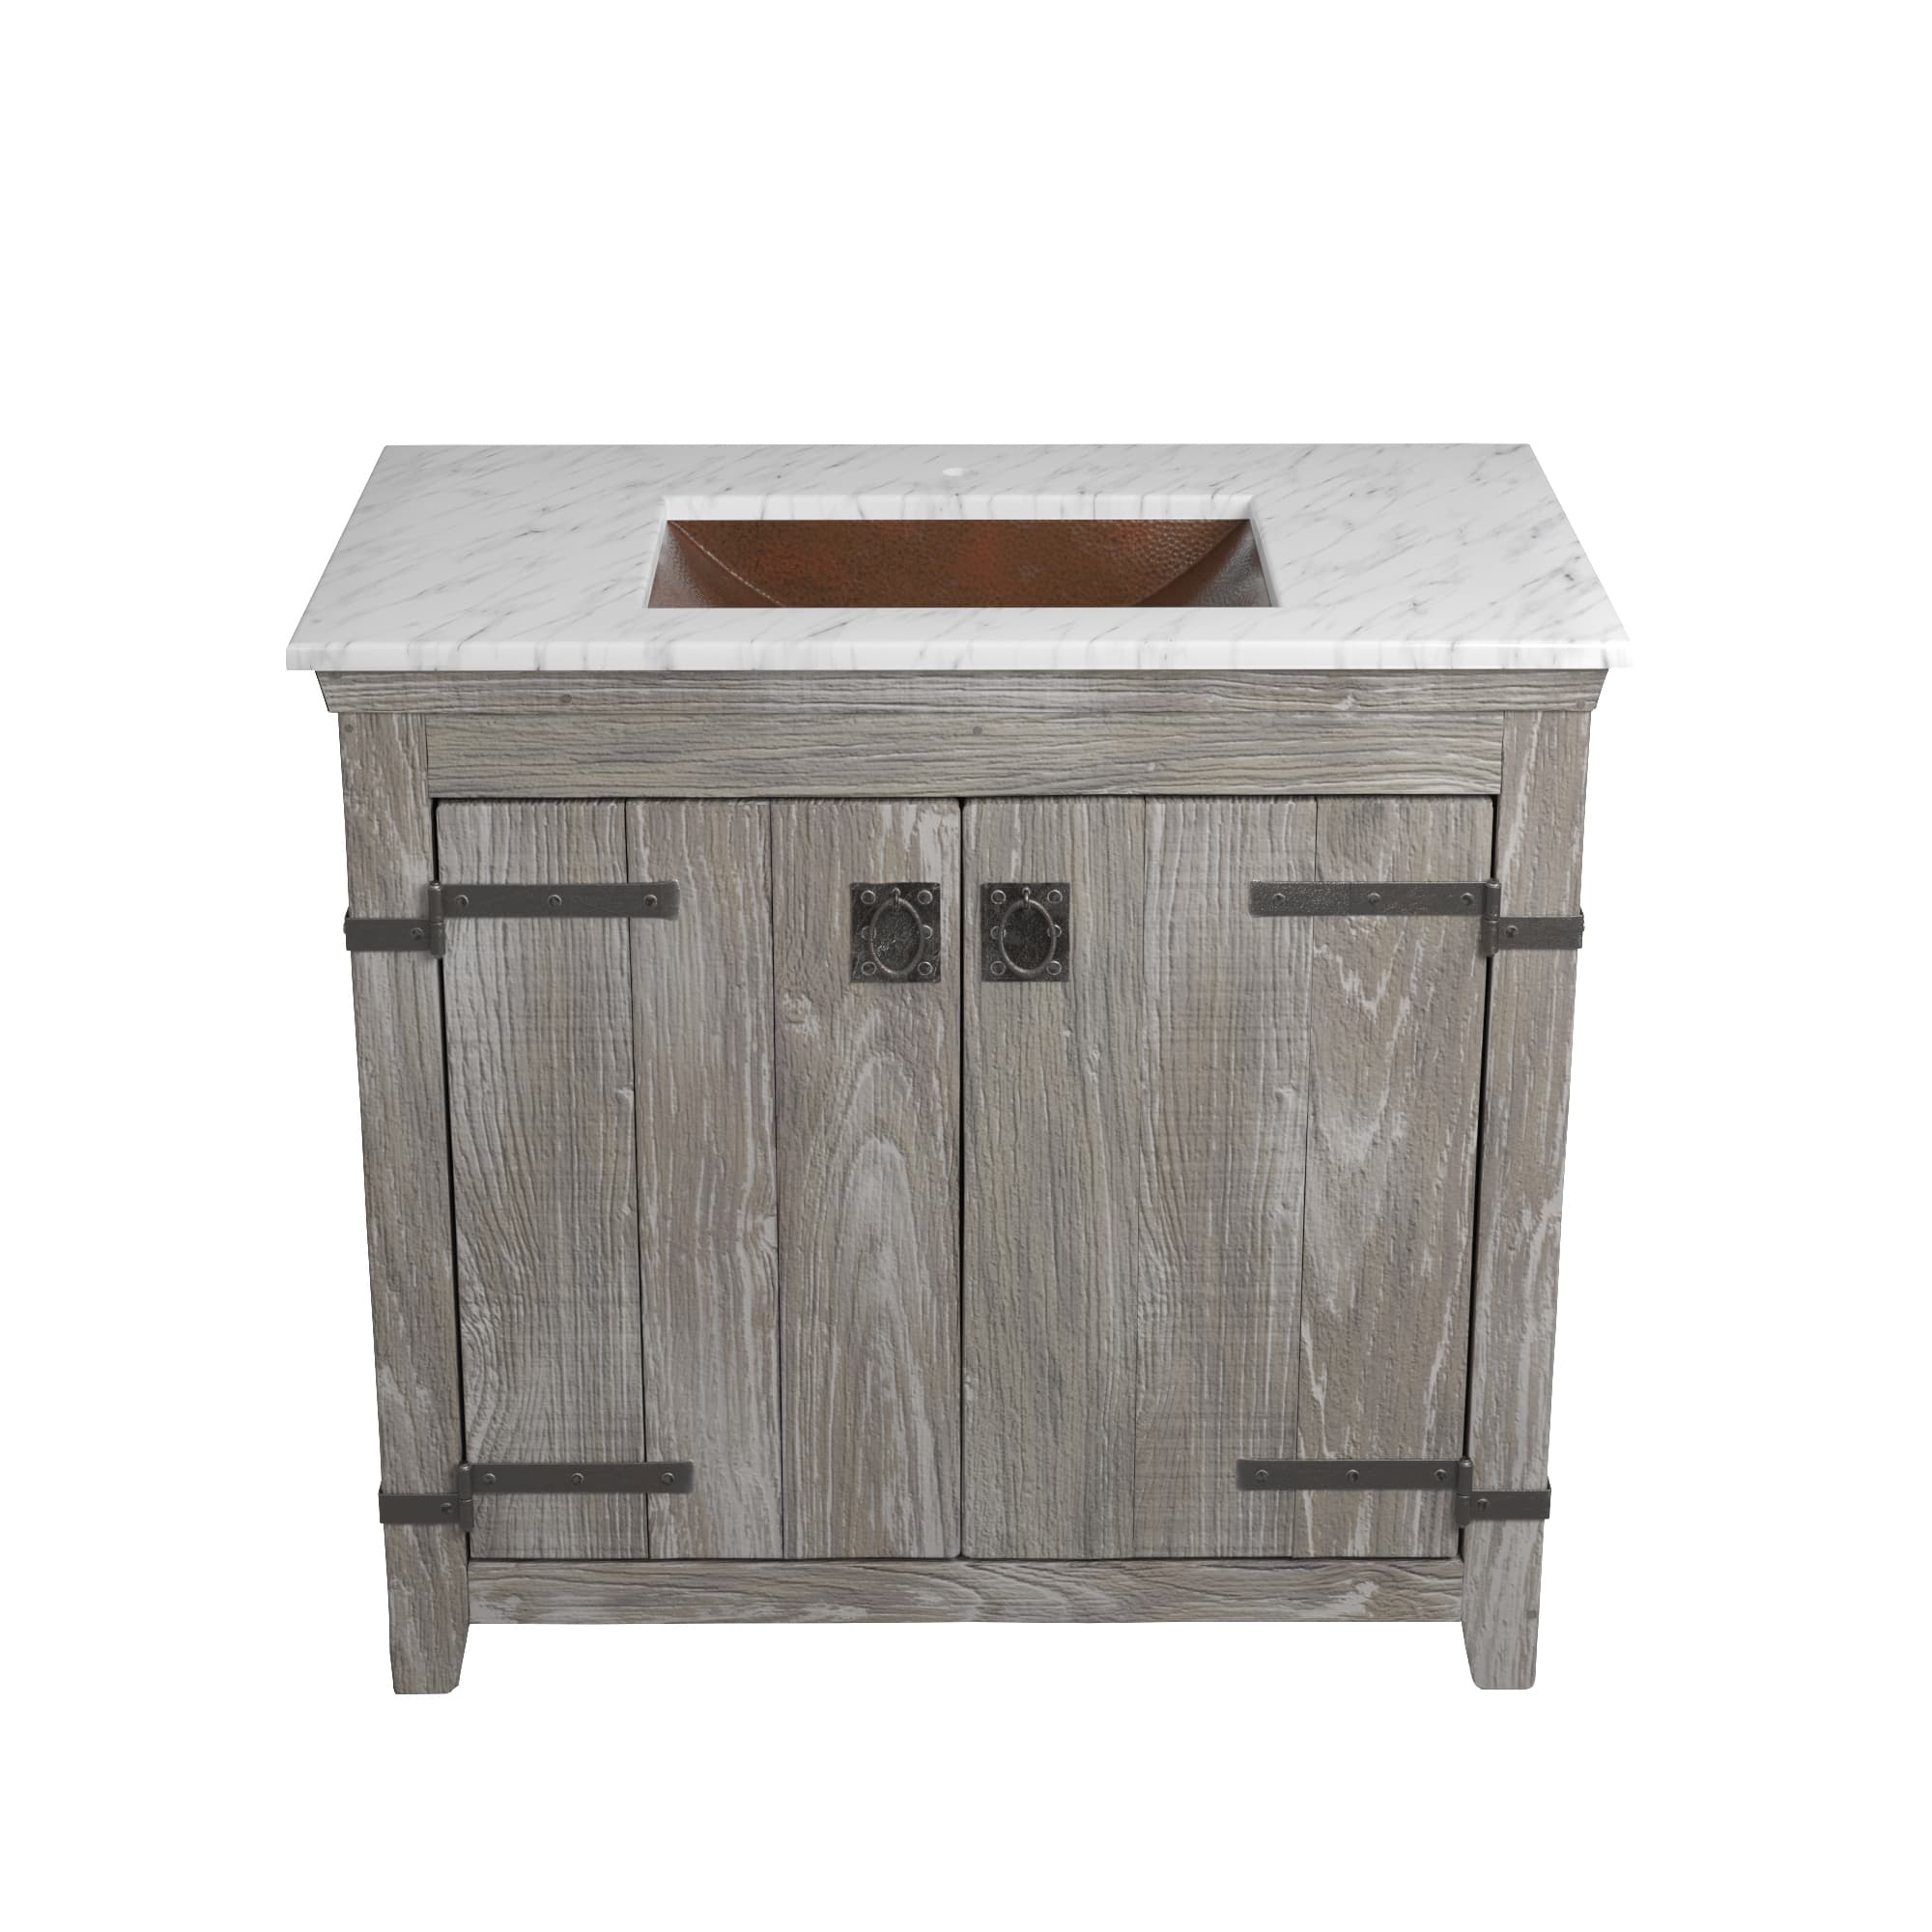 Native Trails 36" Americana Vanity in Driftwood with Carrara Marble Top and Avila in Antique, Single Faucet Hole, BND36-VB-CT-CP-007